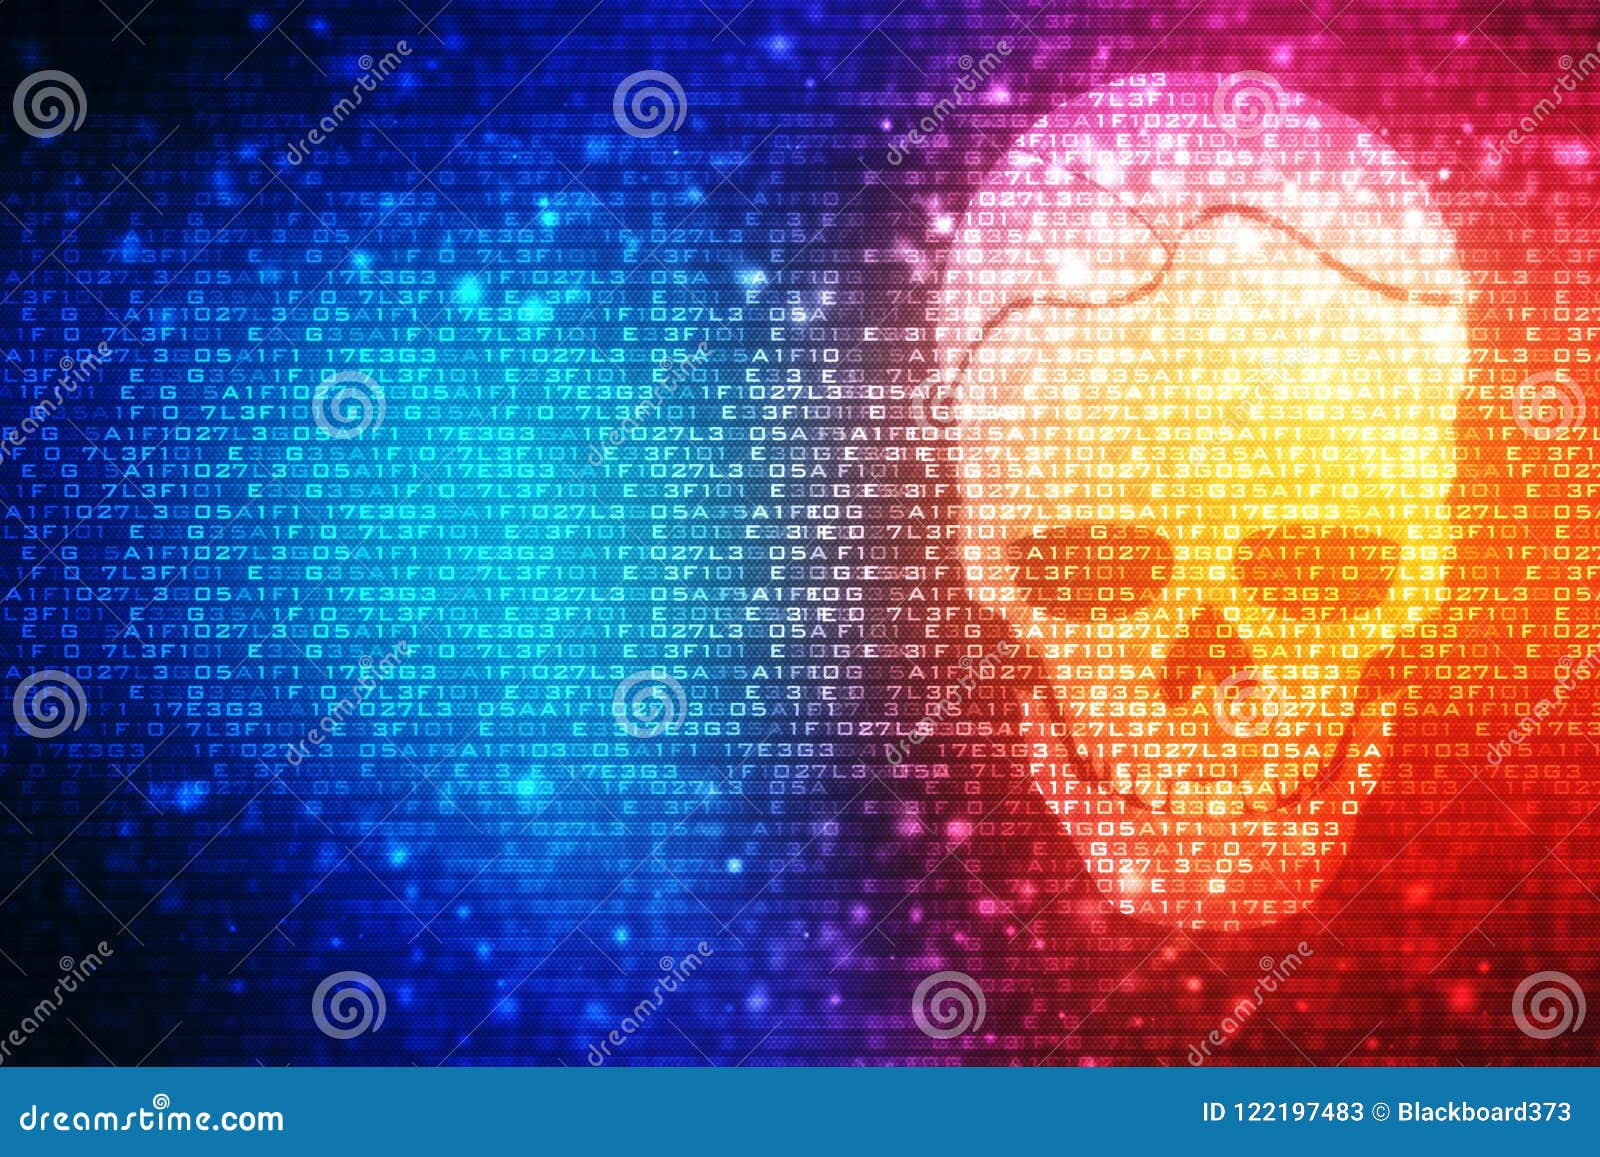 Cyber Hacking Background Skull With Binary Code In Digital